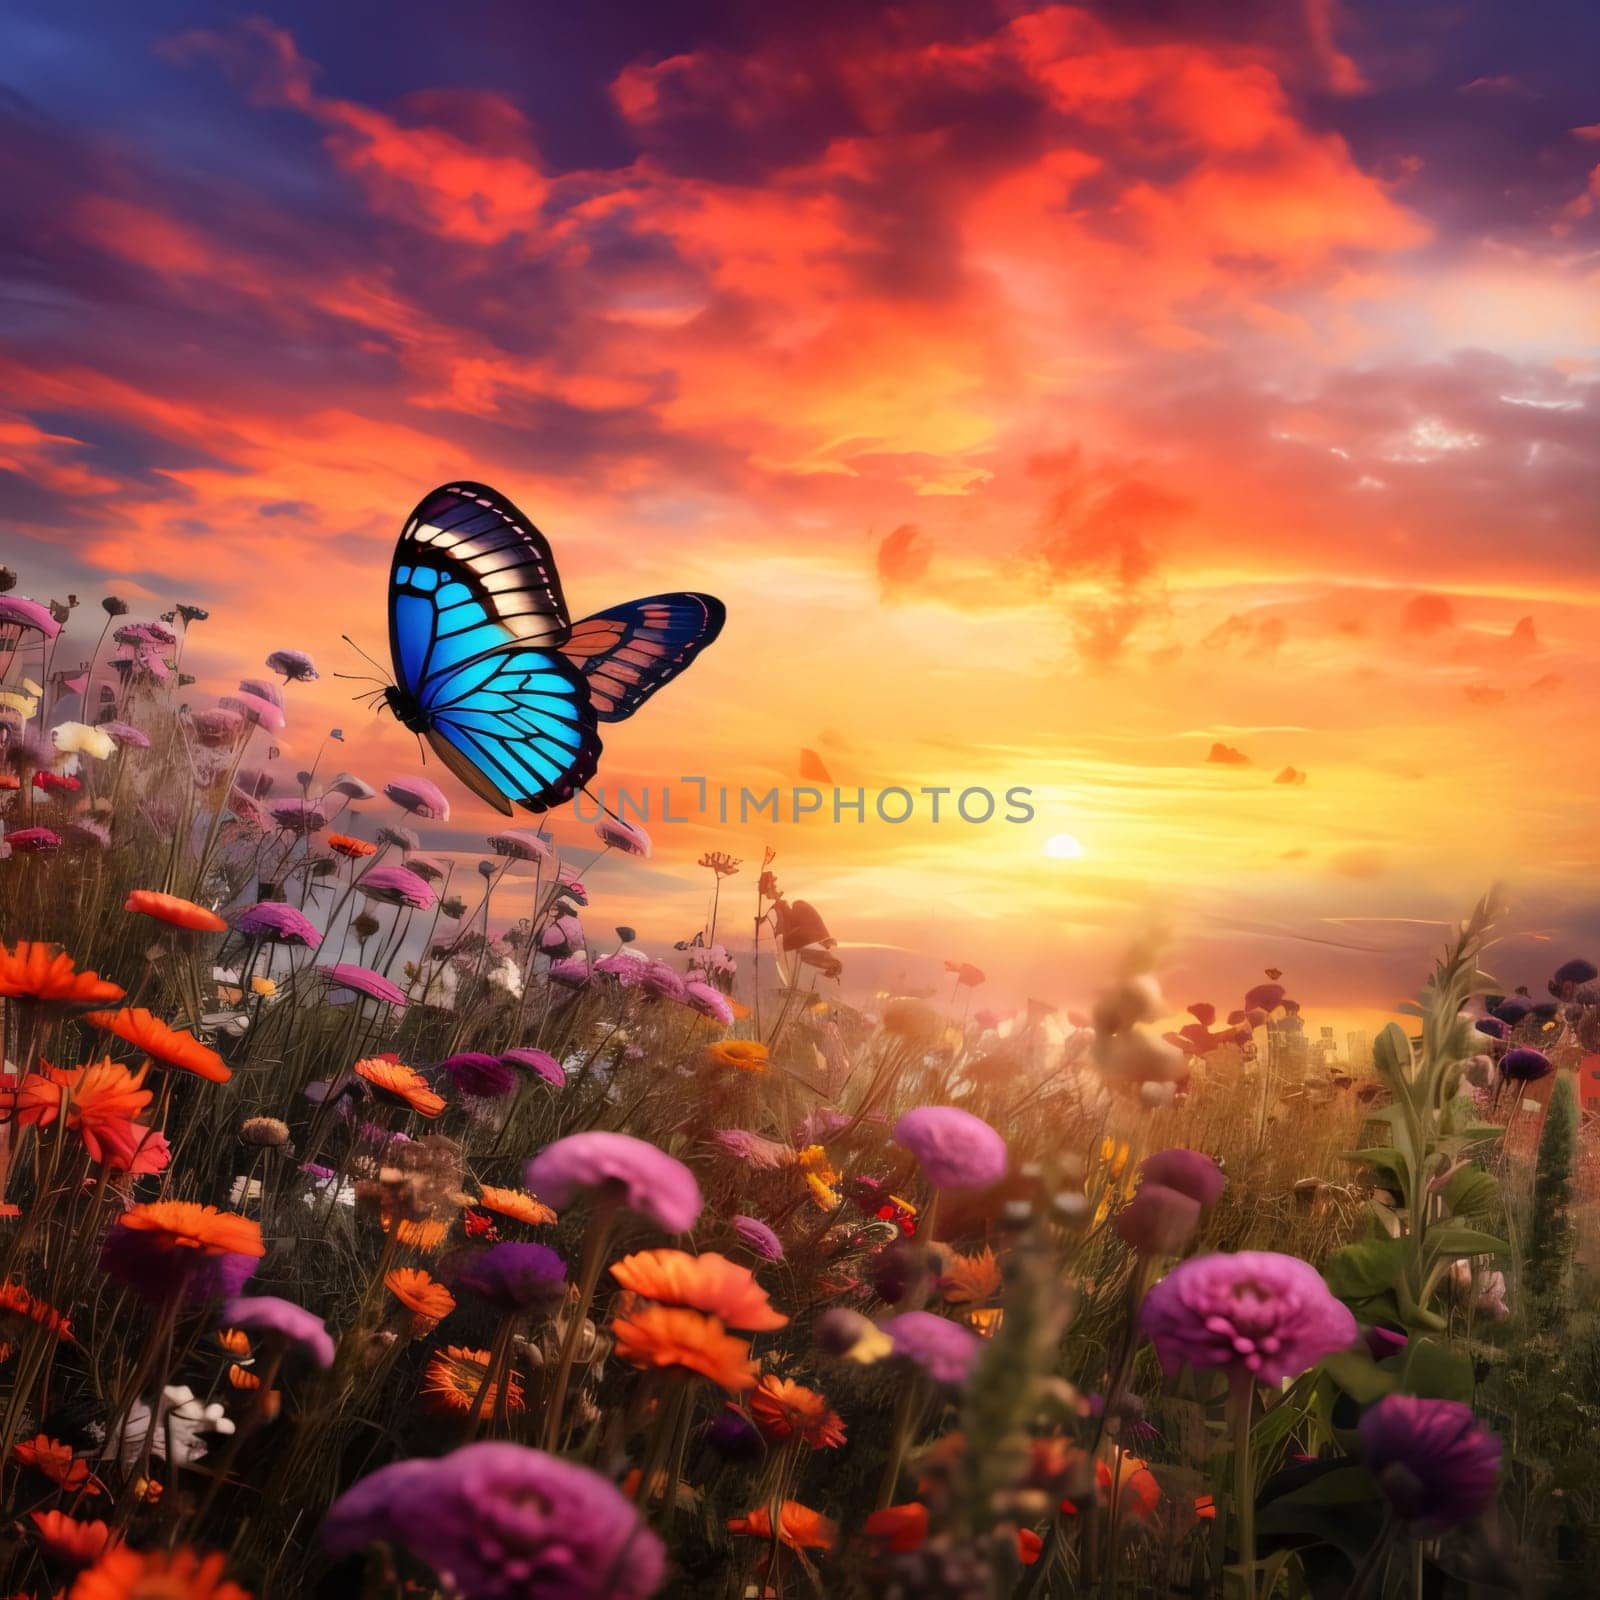 A meadow of colorful flowers, a flying butterfly and a beautiful setting sun. Flowering flowers, a symbol of spring, new life. by ThemesS